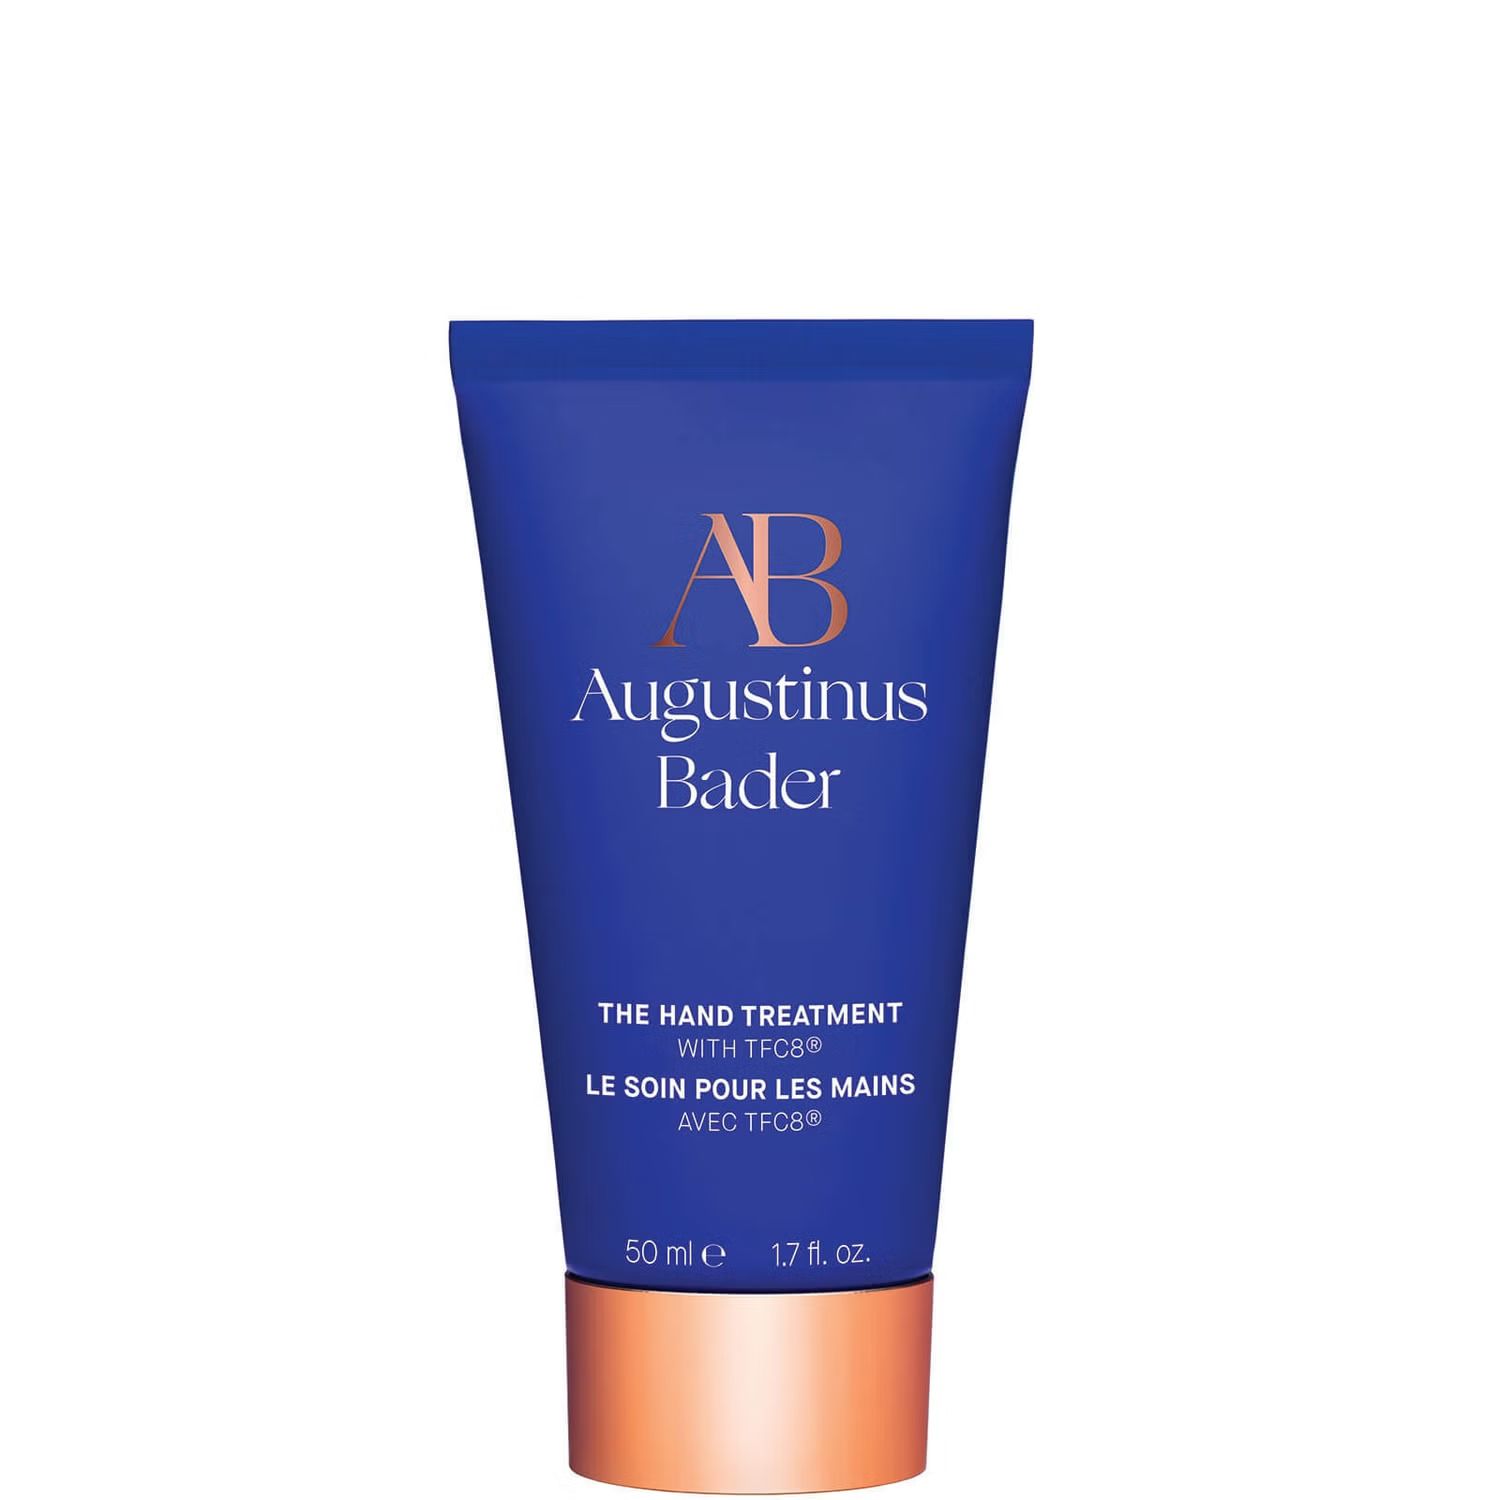 Augustinus Bader The Hand Treatment 50ml | Cult Beauty